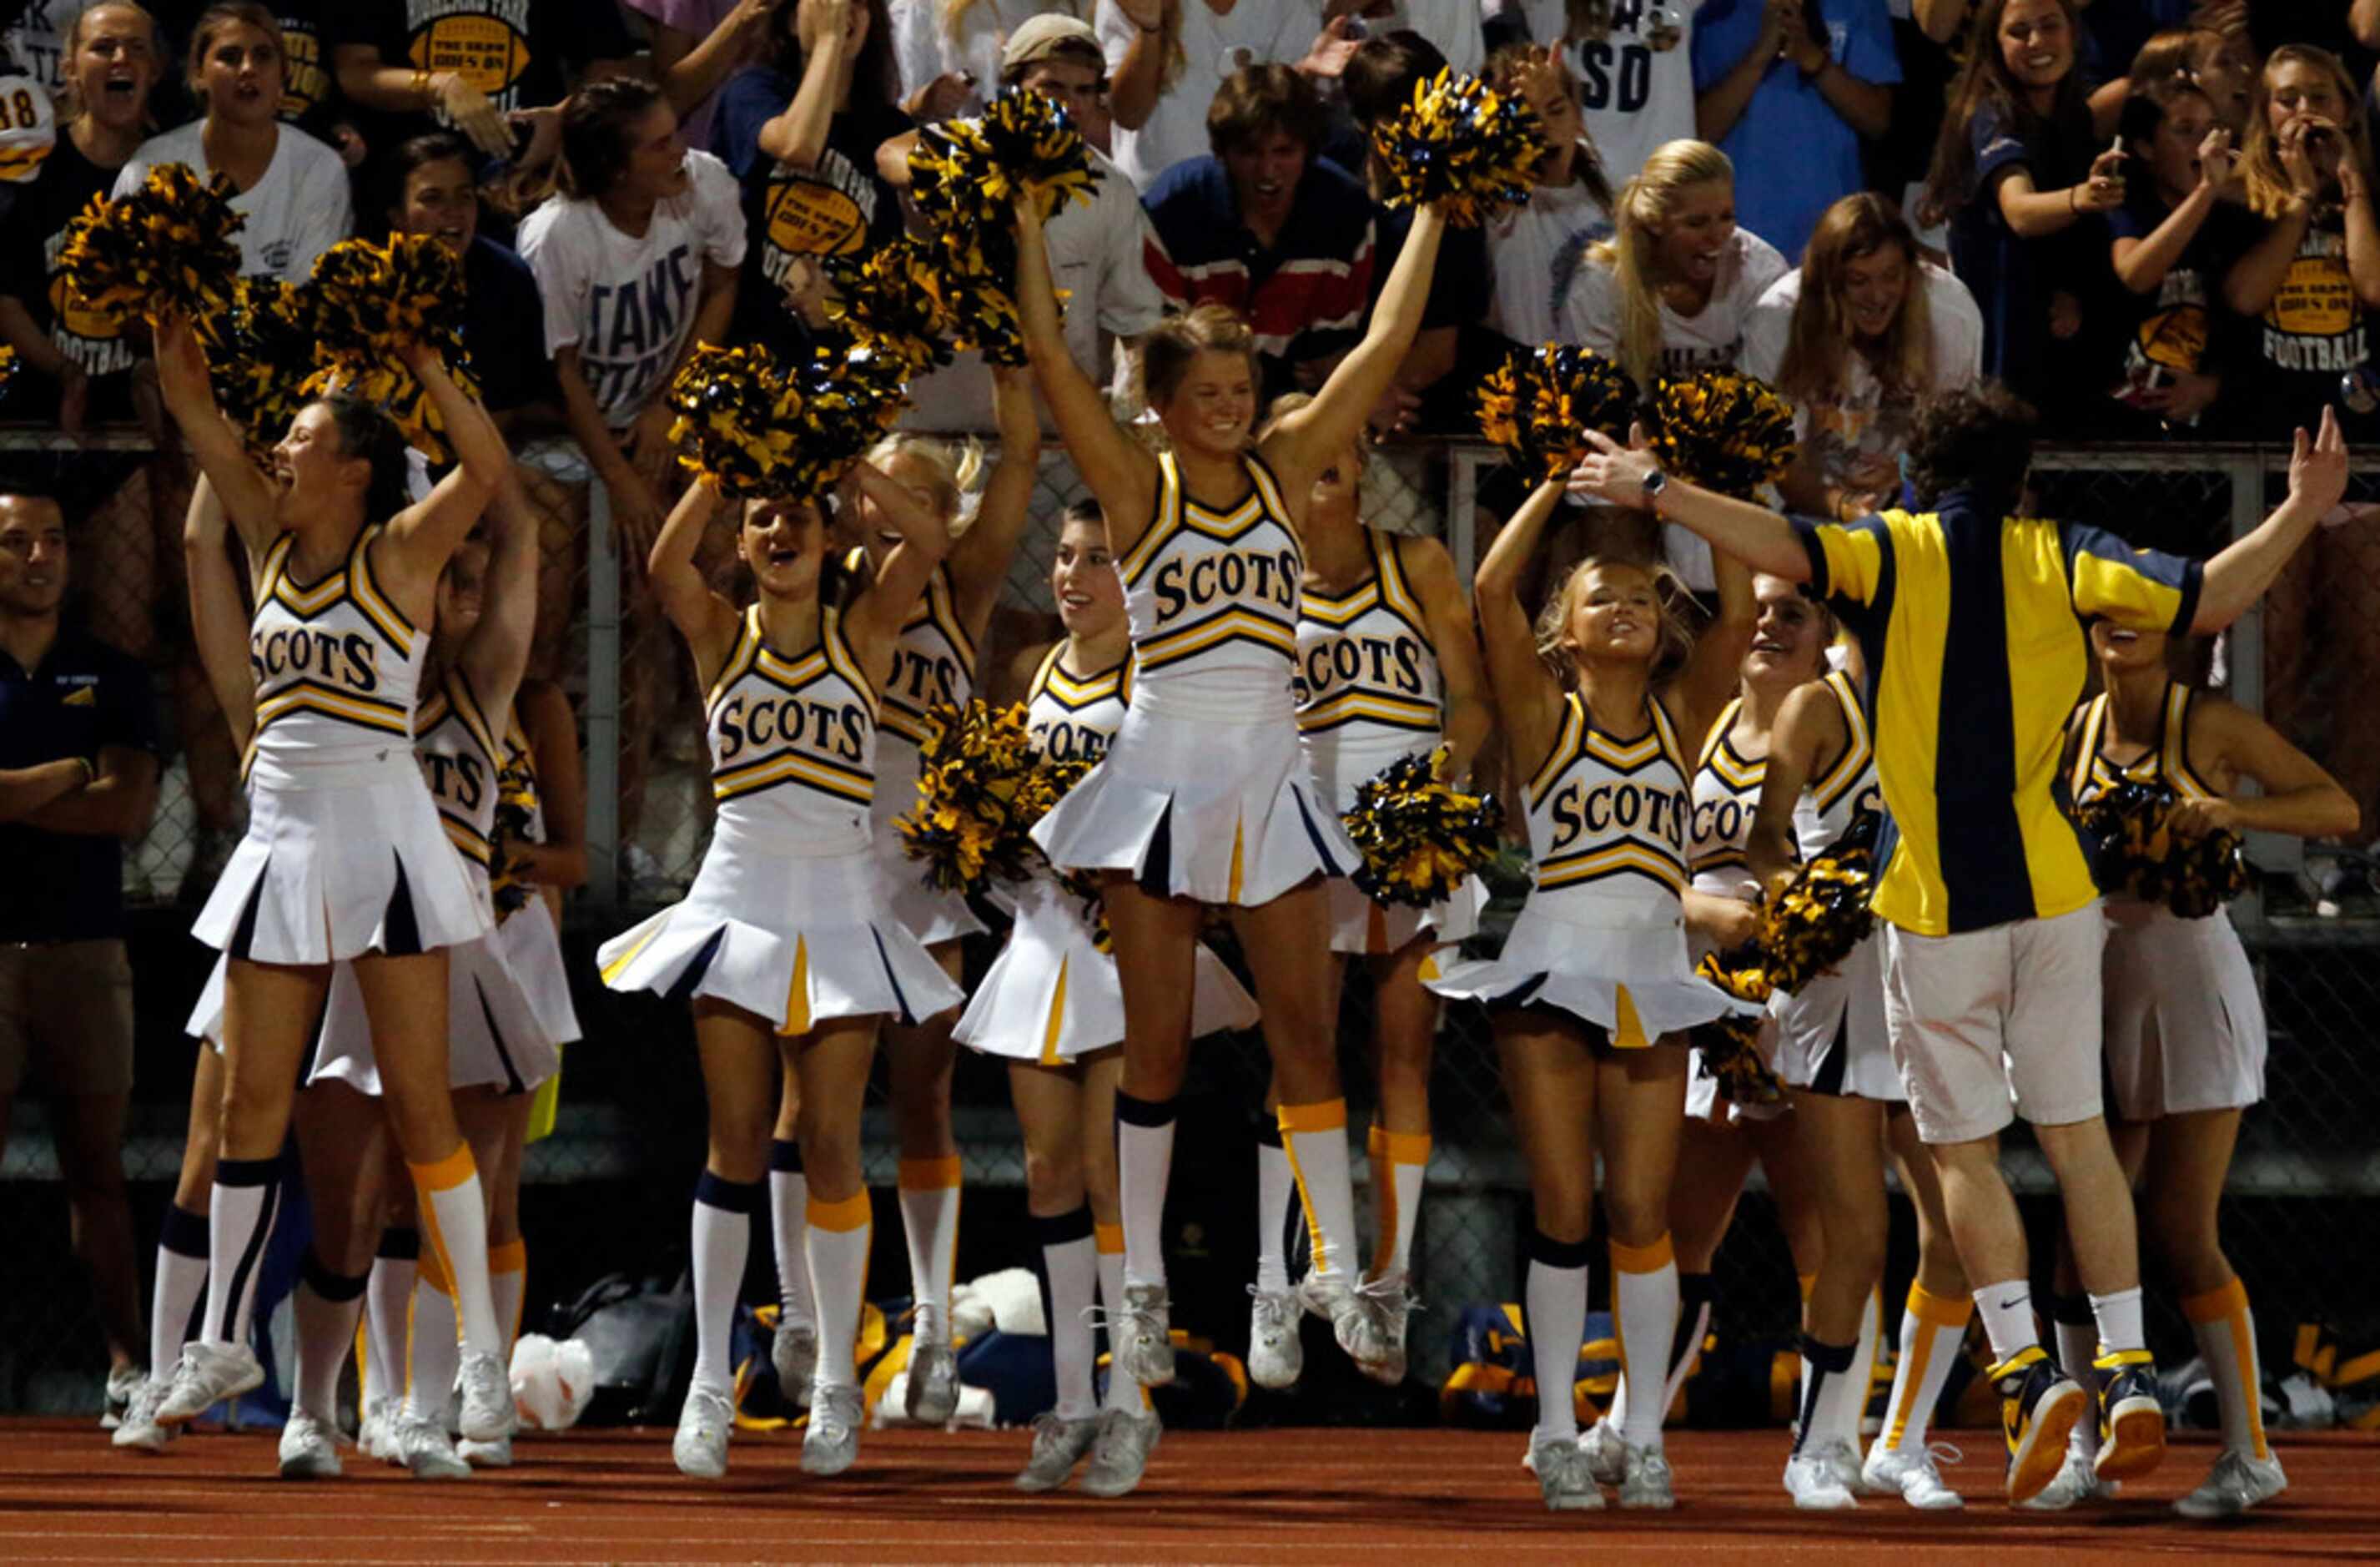 The Highland Park High cheerleaders jump for joy as the team scores and ties up the score...